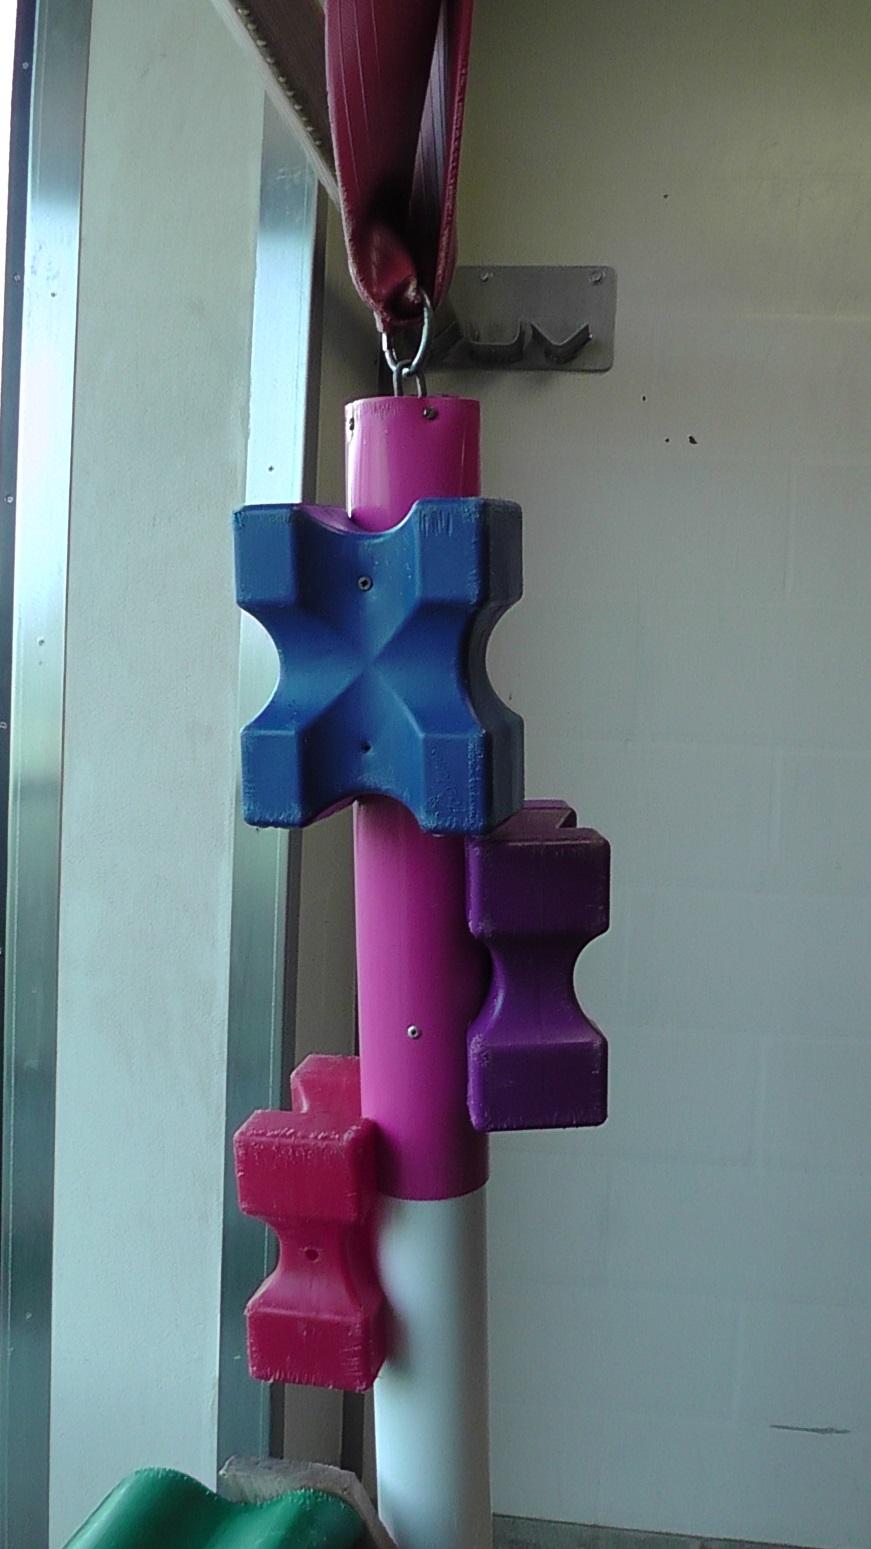 PVC pipe with plastic blocks attached suspended from a fire hose for structural enrichment